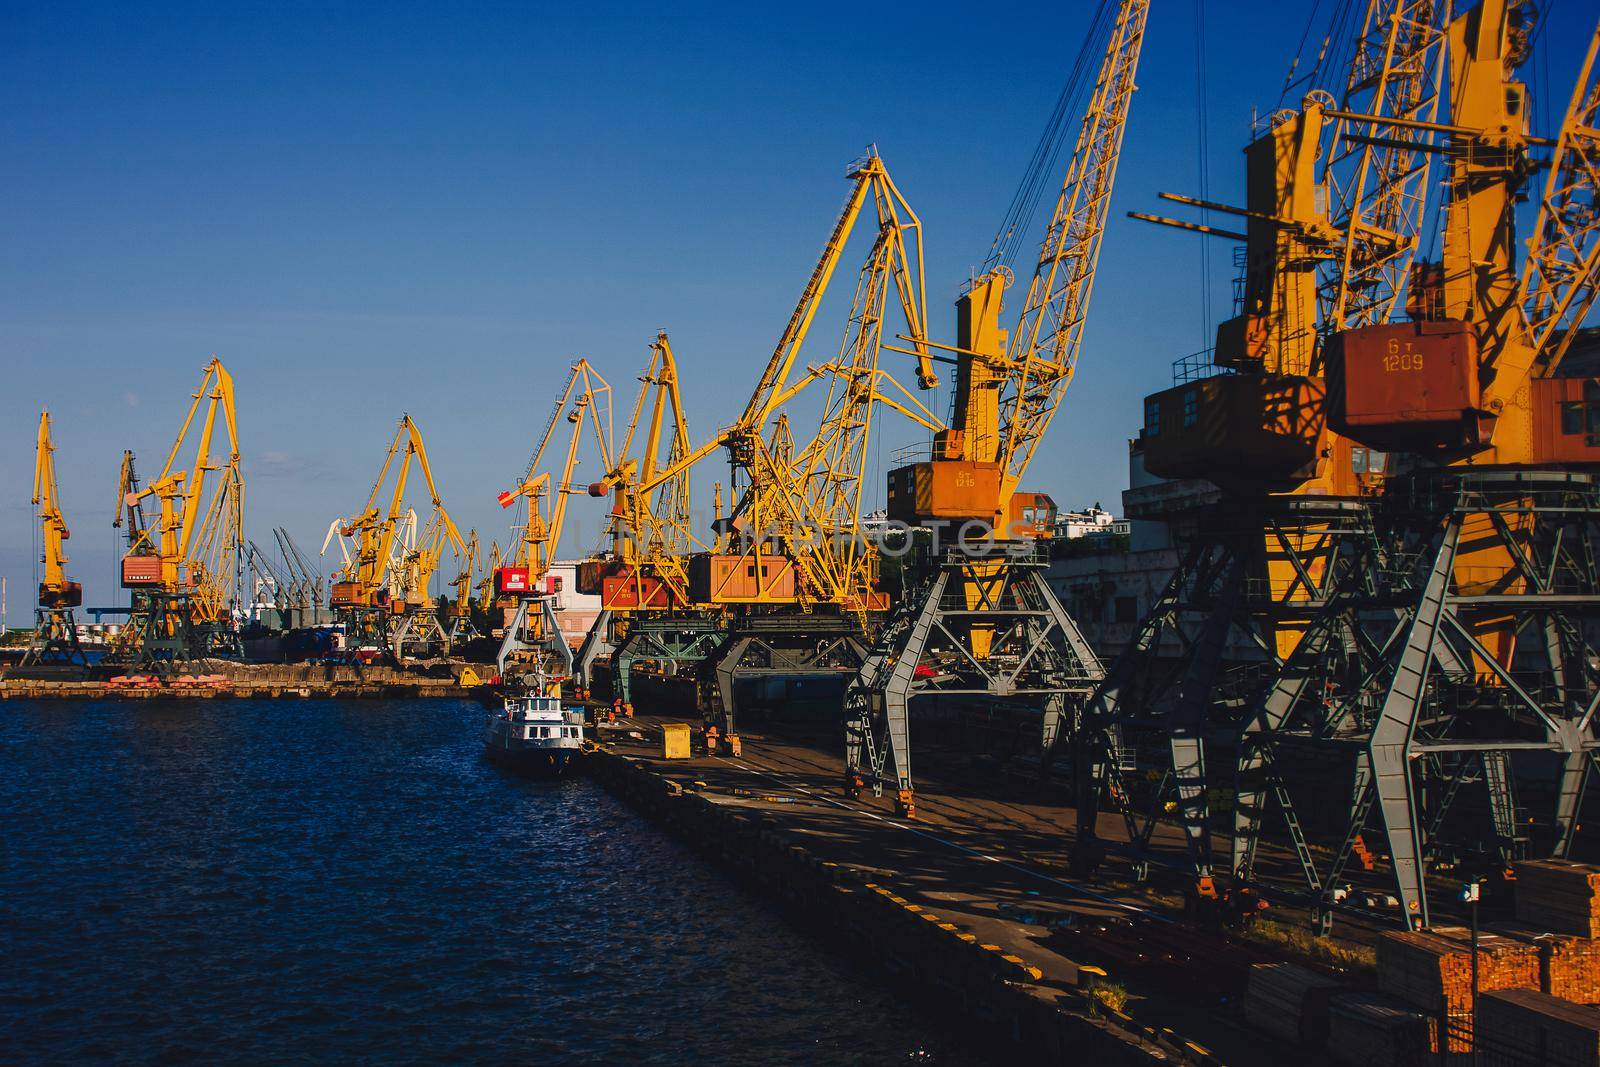 Odessa commercial port . It's the world's busiest port in terms of total shipping tonnage.